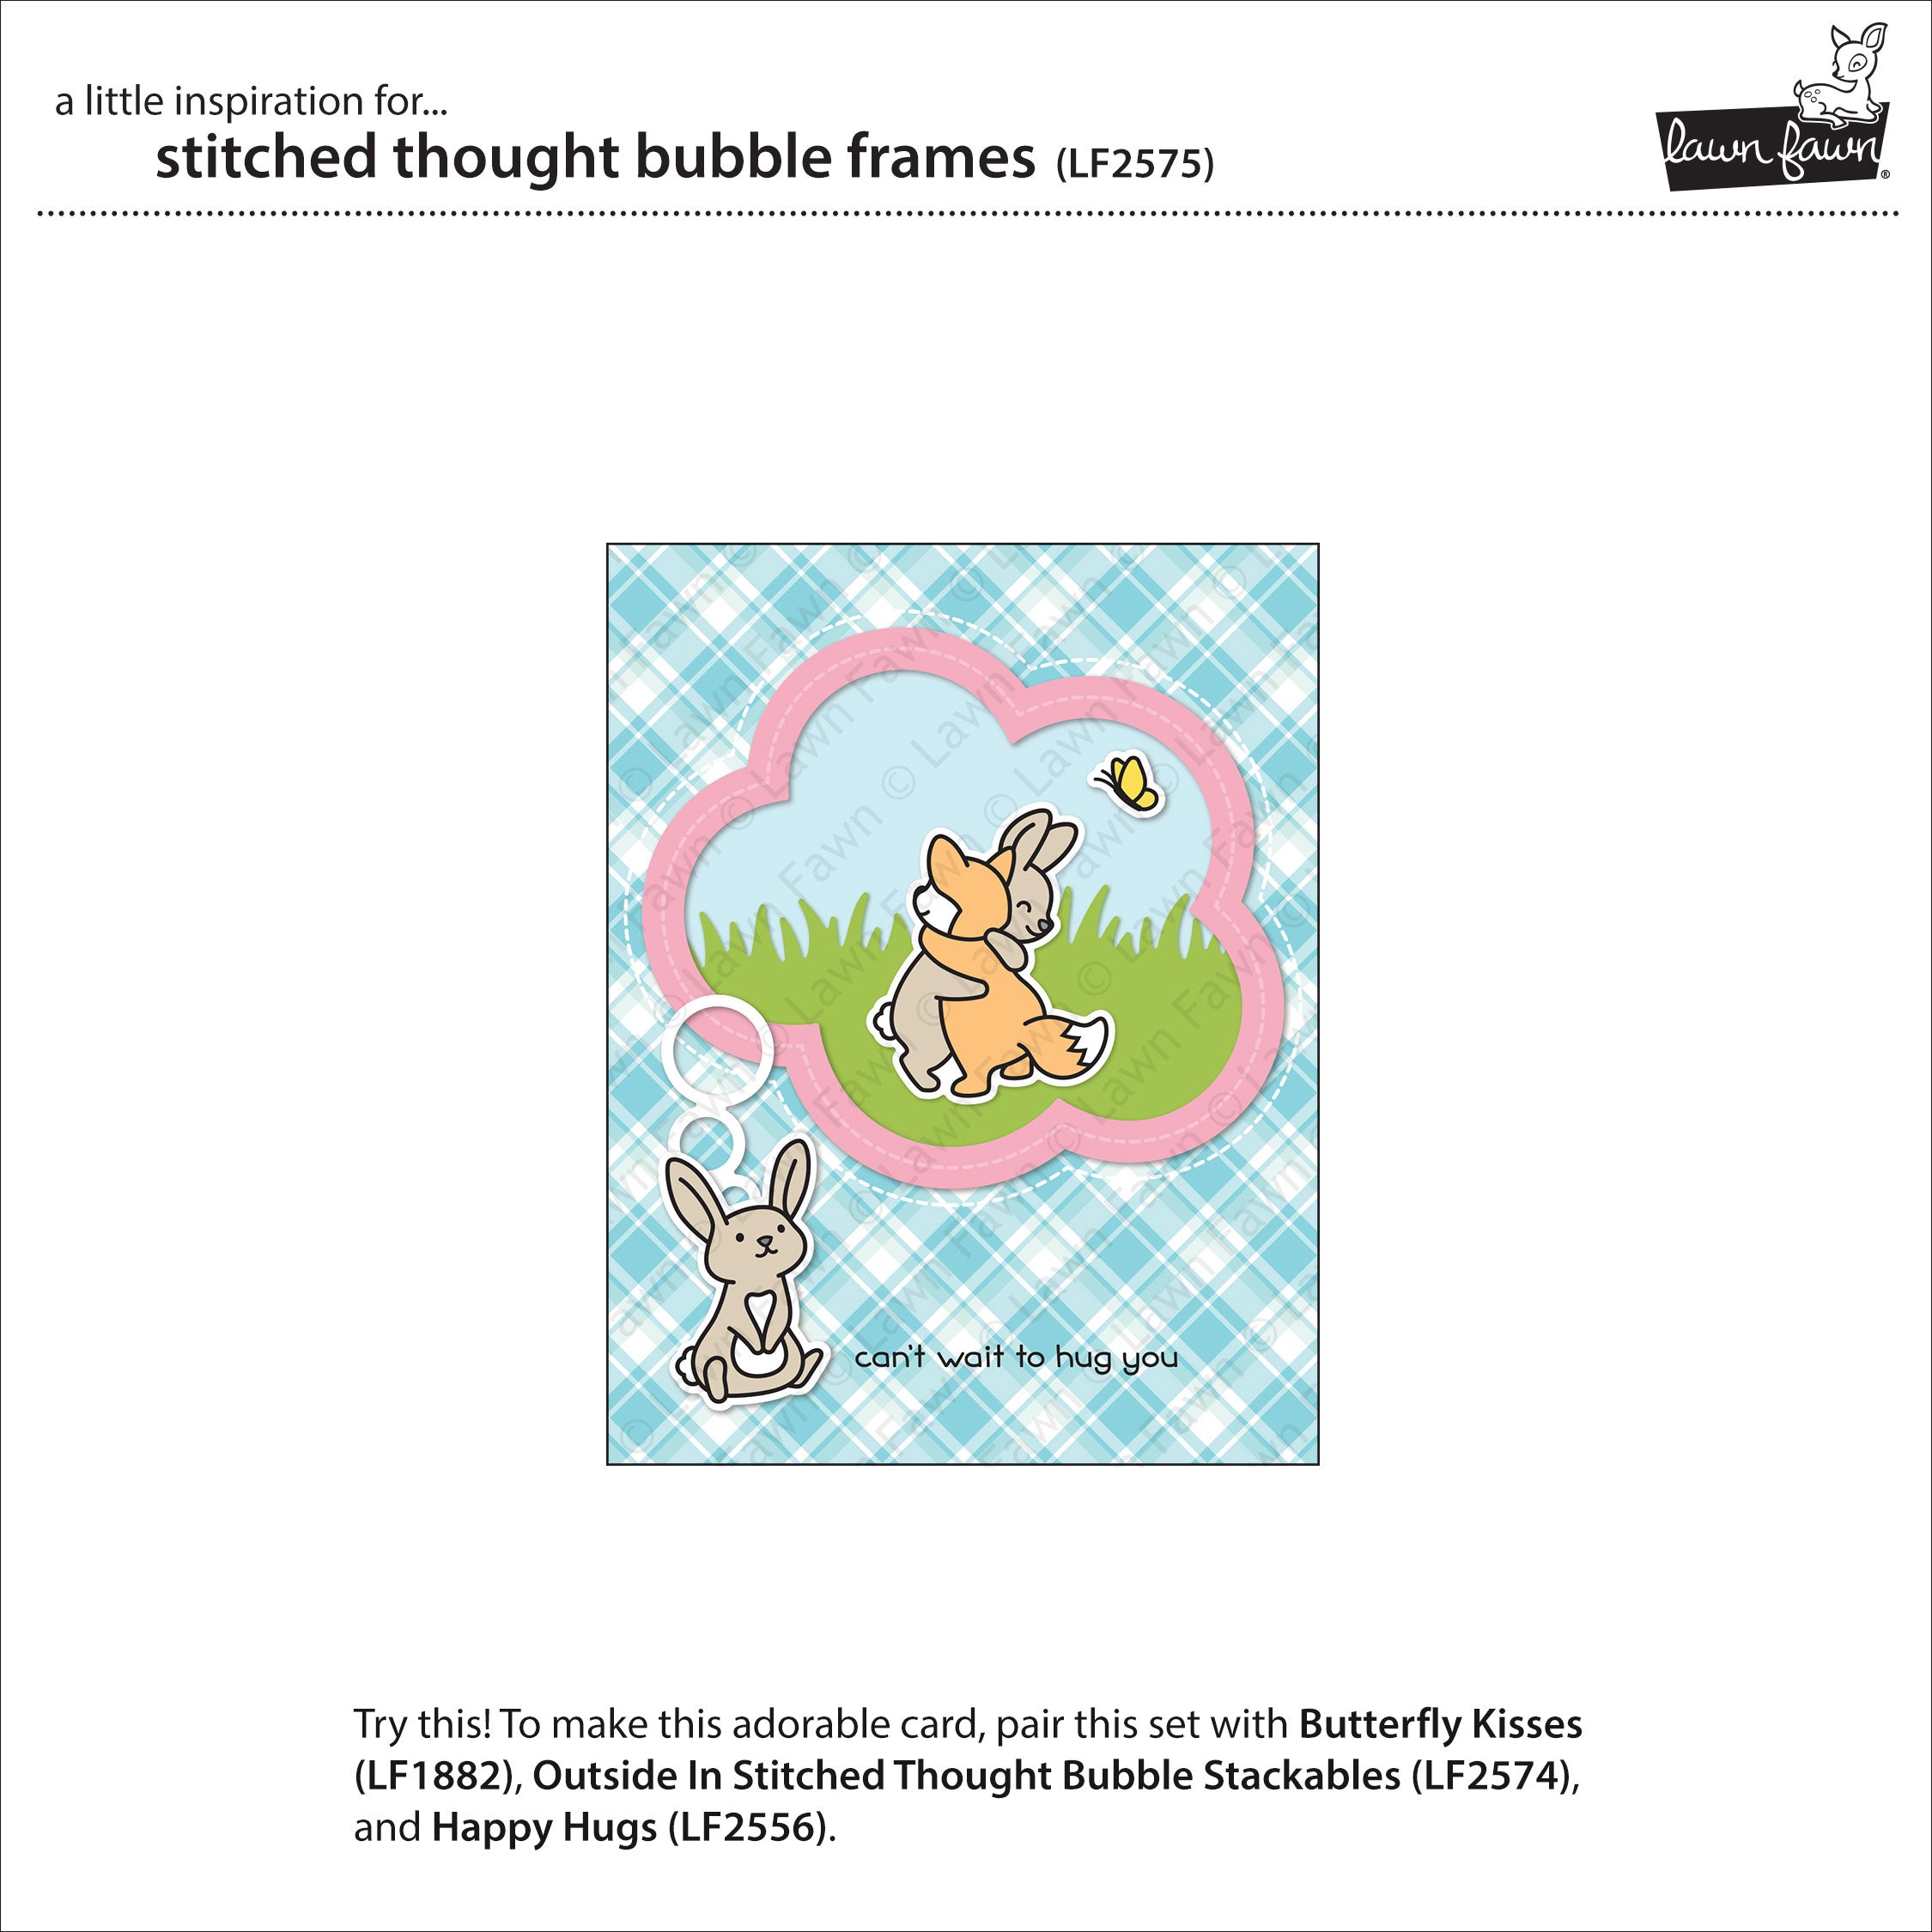 stitched thought bubble frames